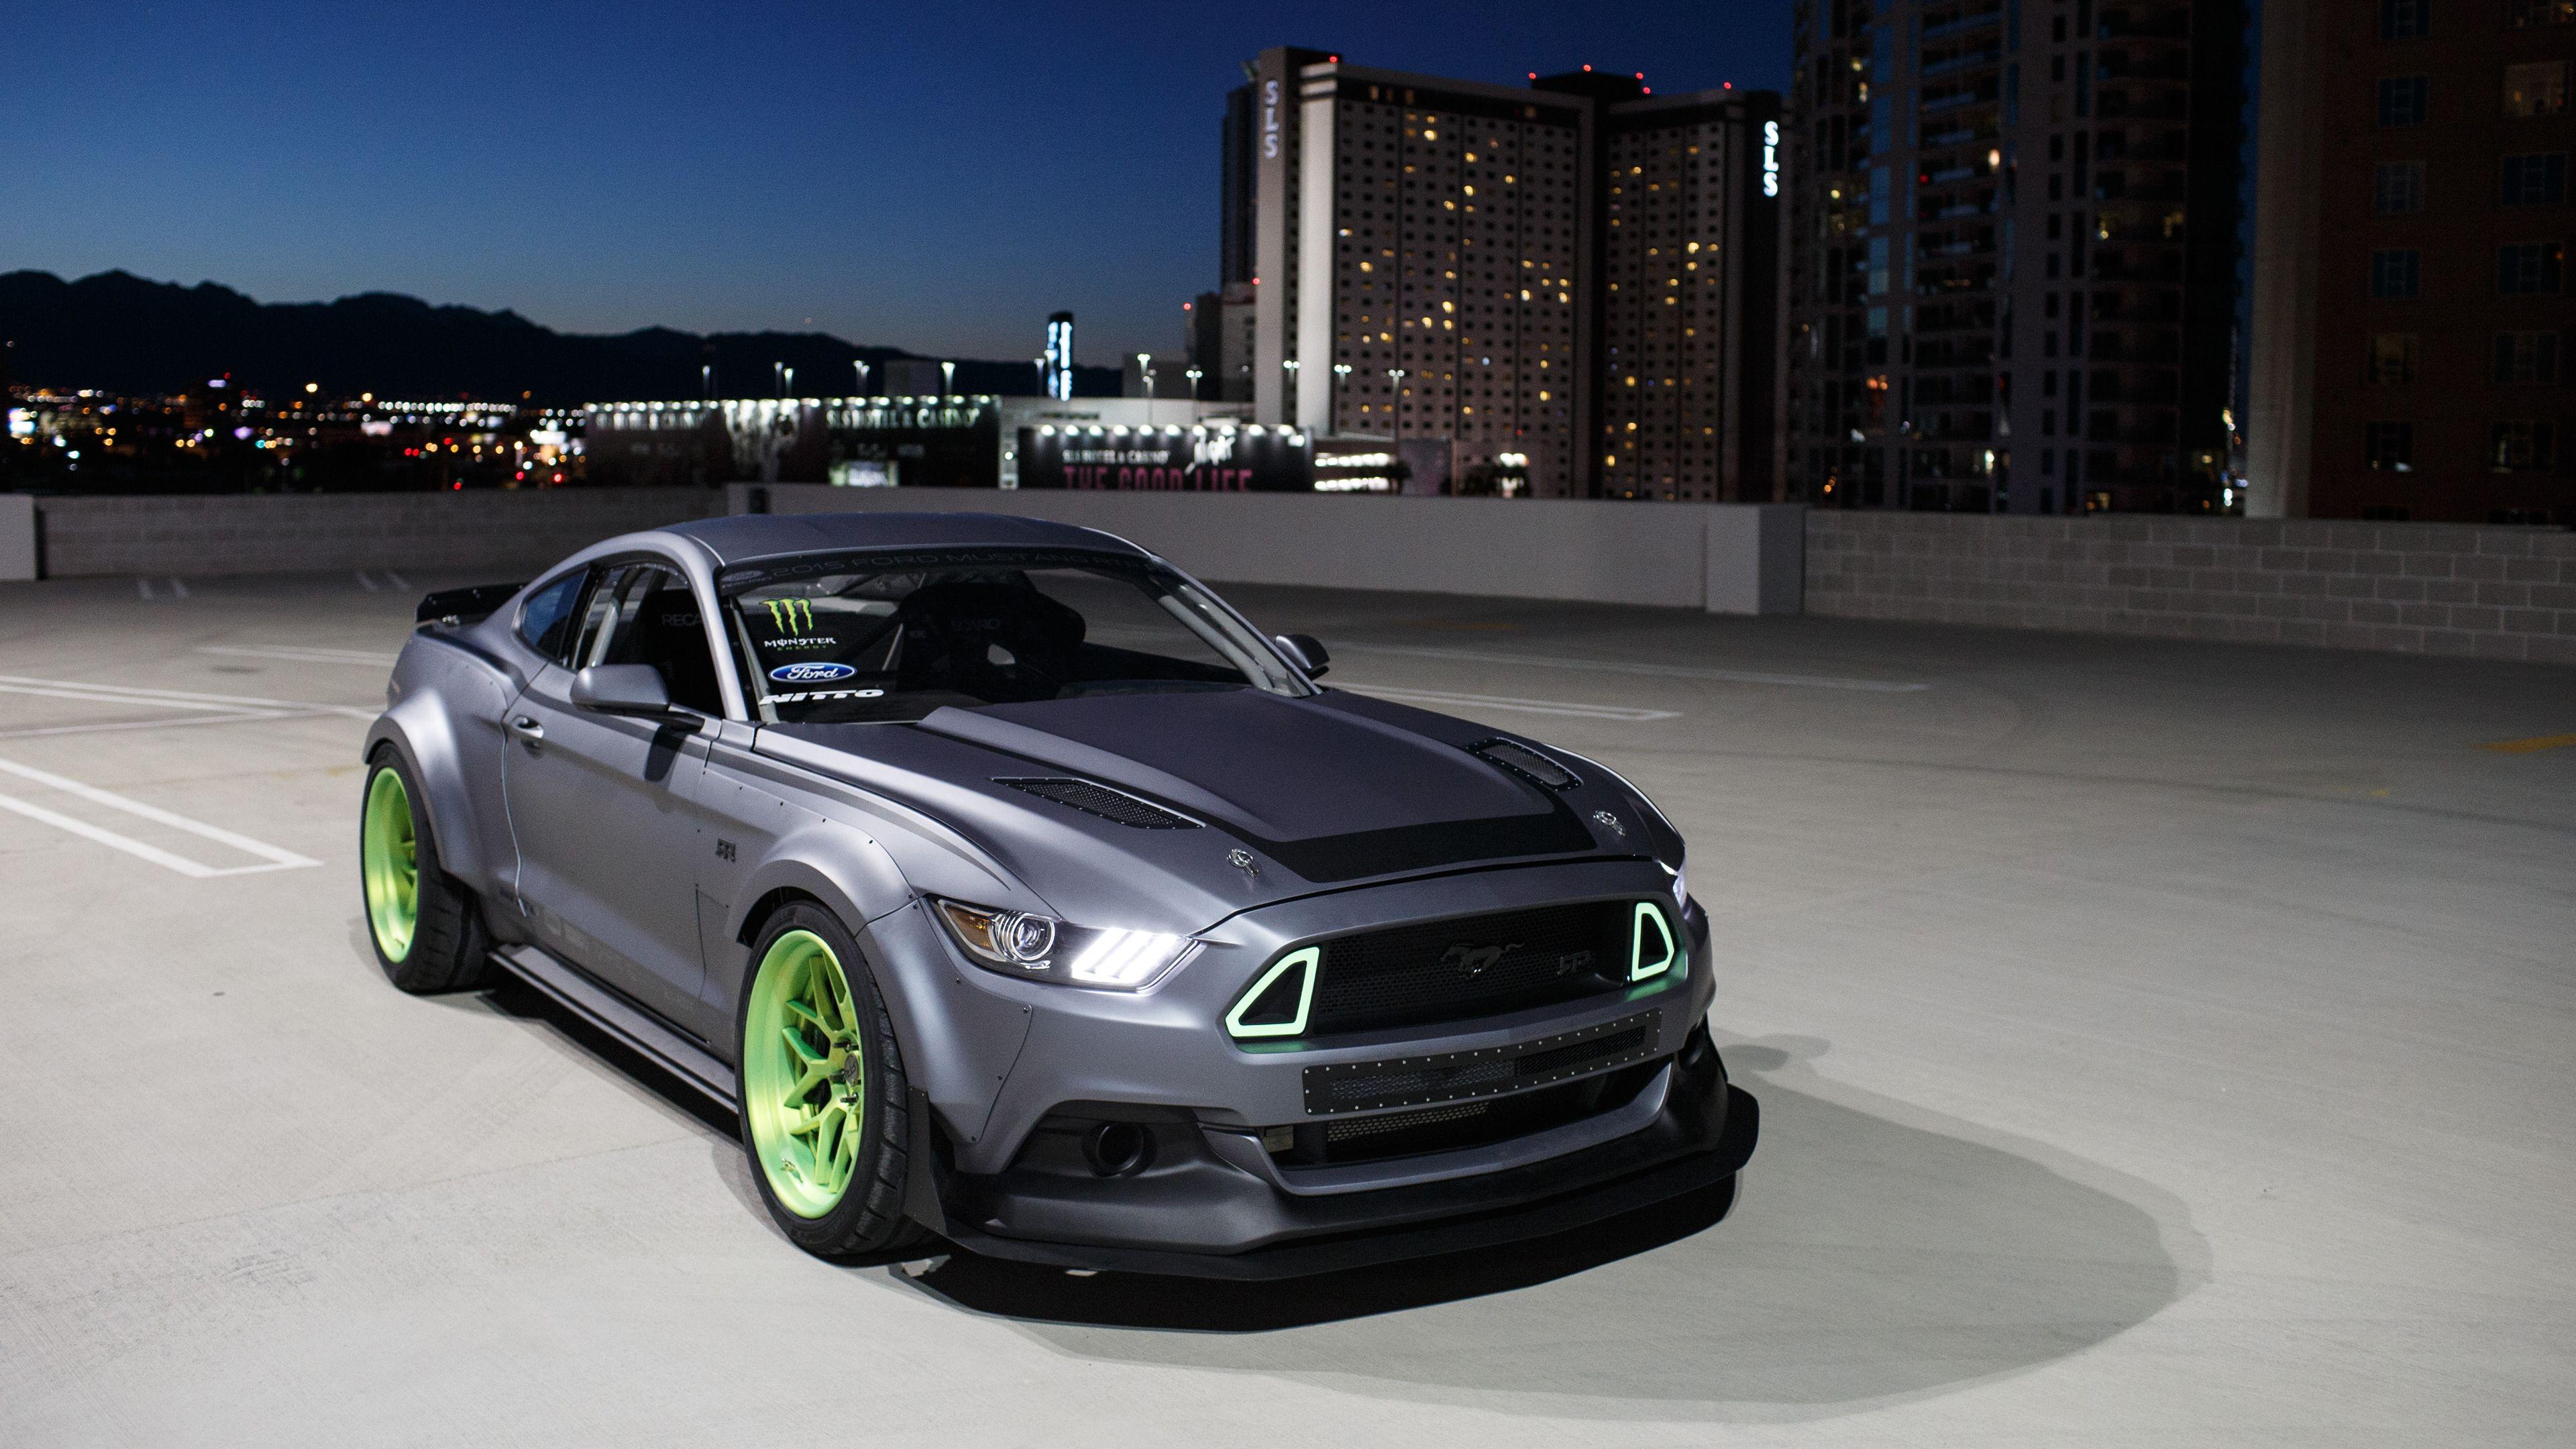 ford mustang rtr Ultra HD Wallpaper ford mustang